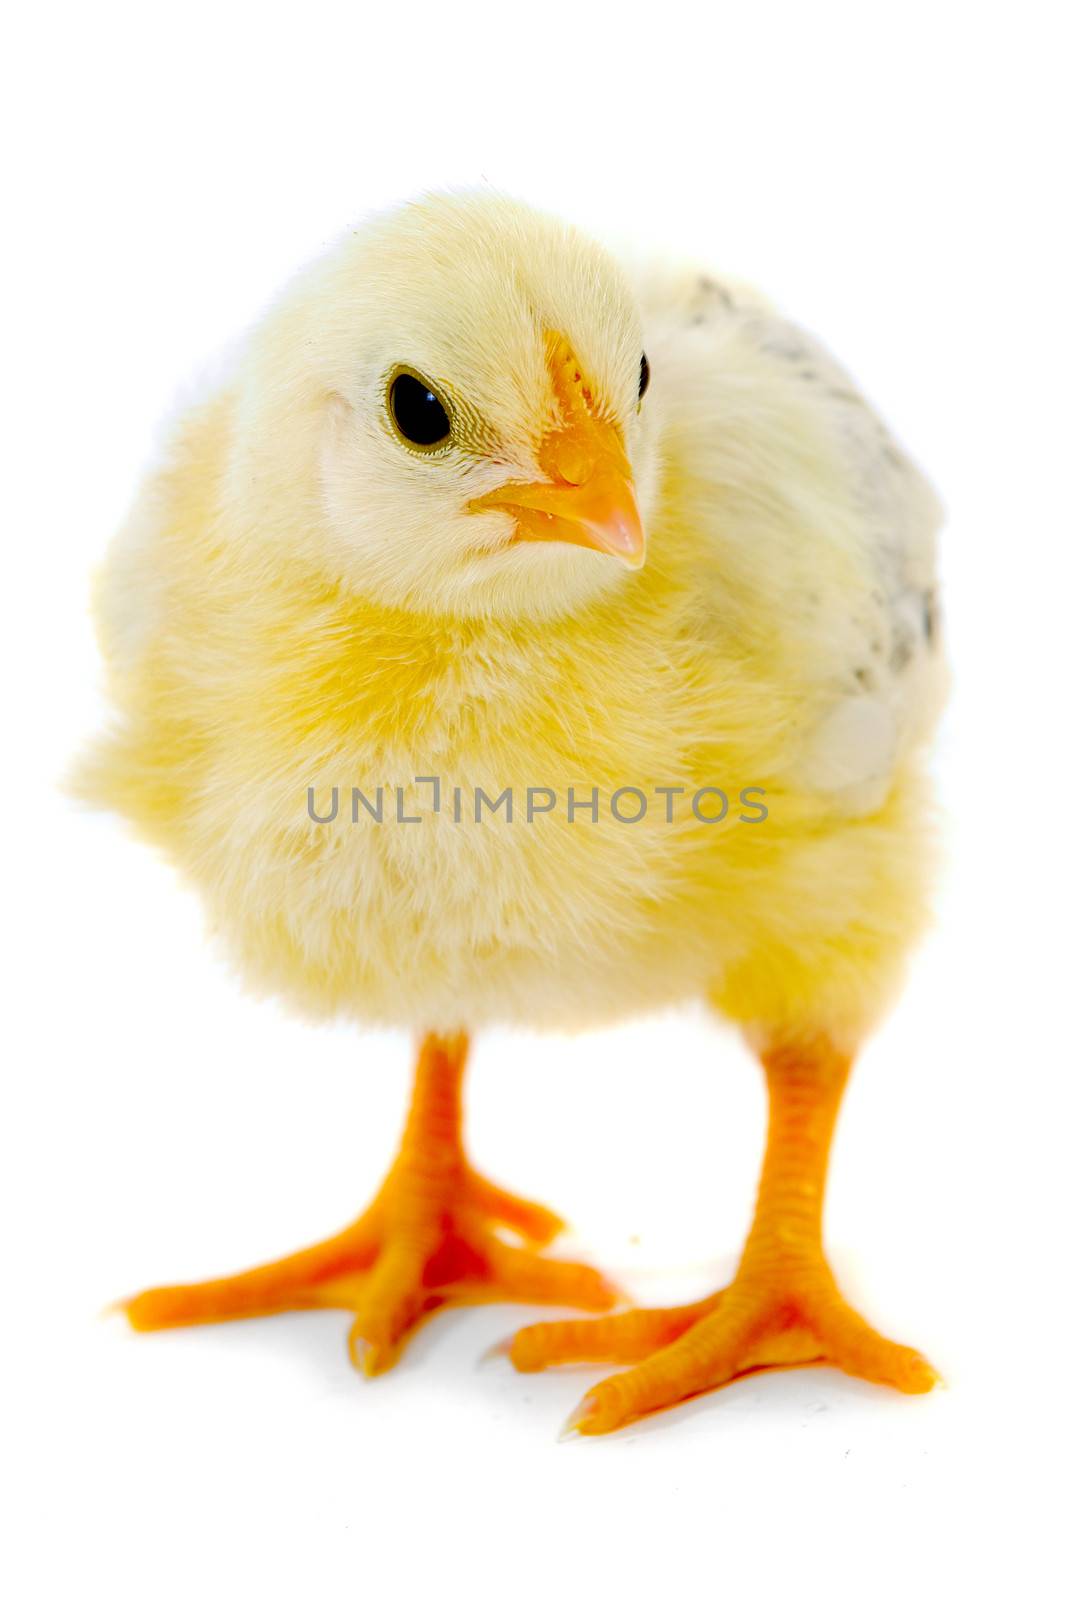 Sweet baby chicken is standing on a clean white background.